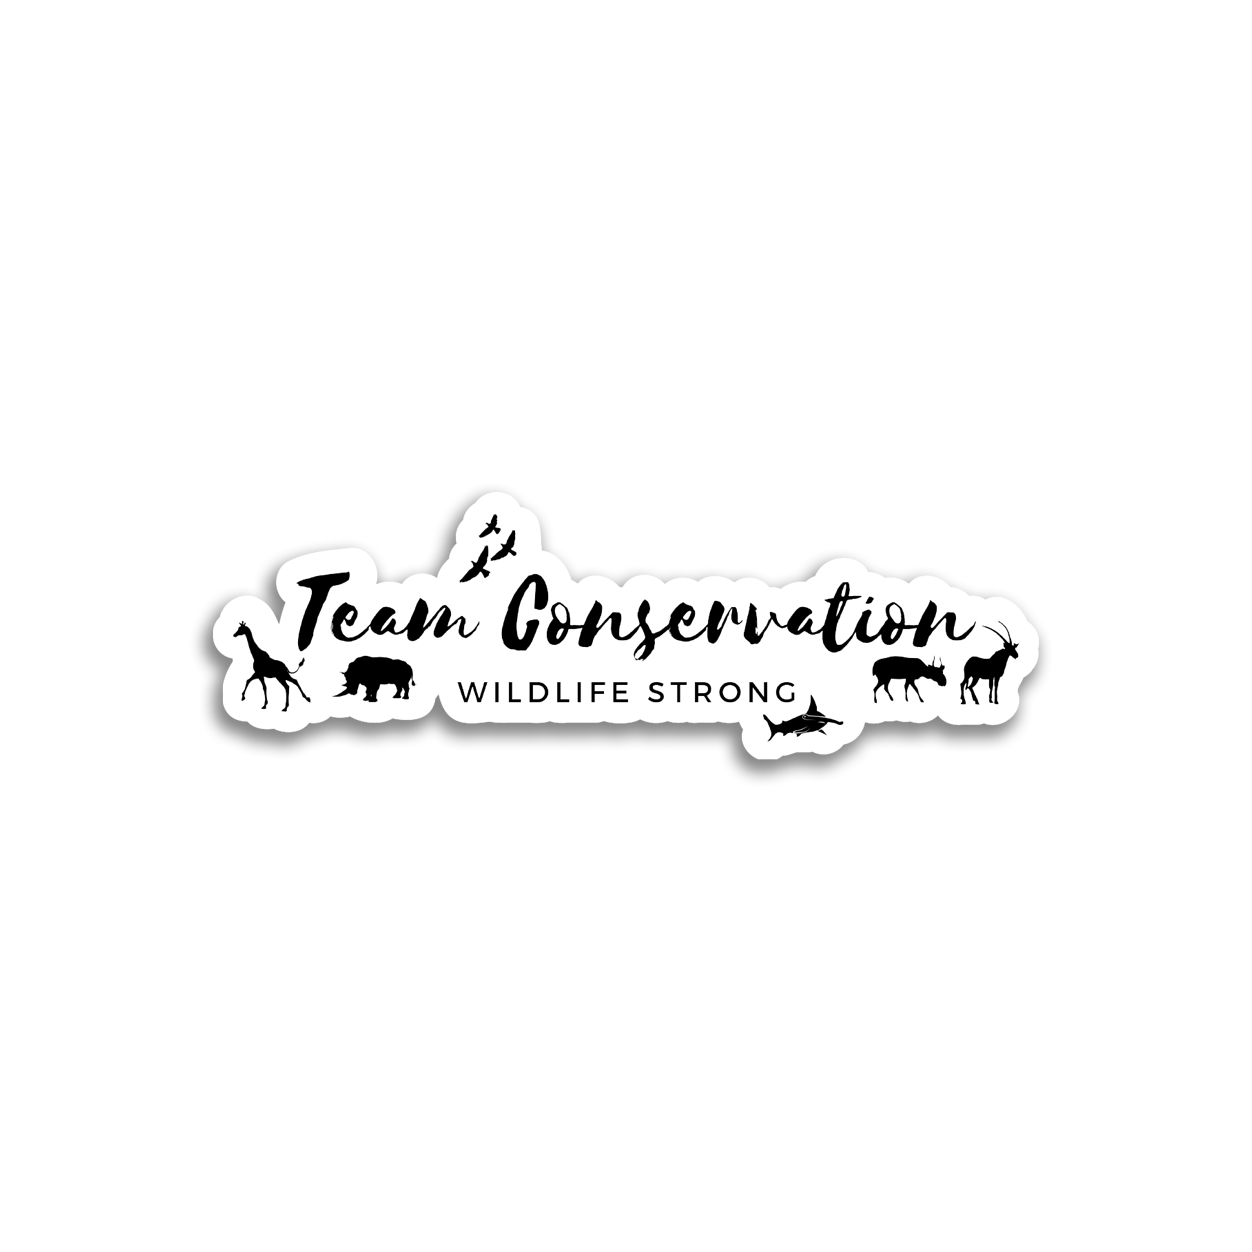 Team Conservation Wildlife Strong - Sticker - Animals Anonymous Apparel